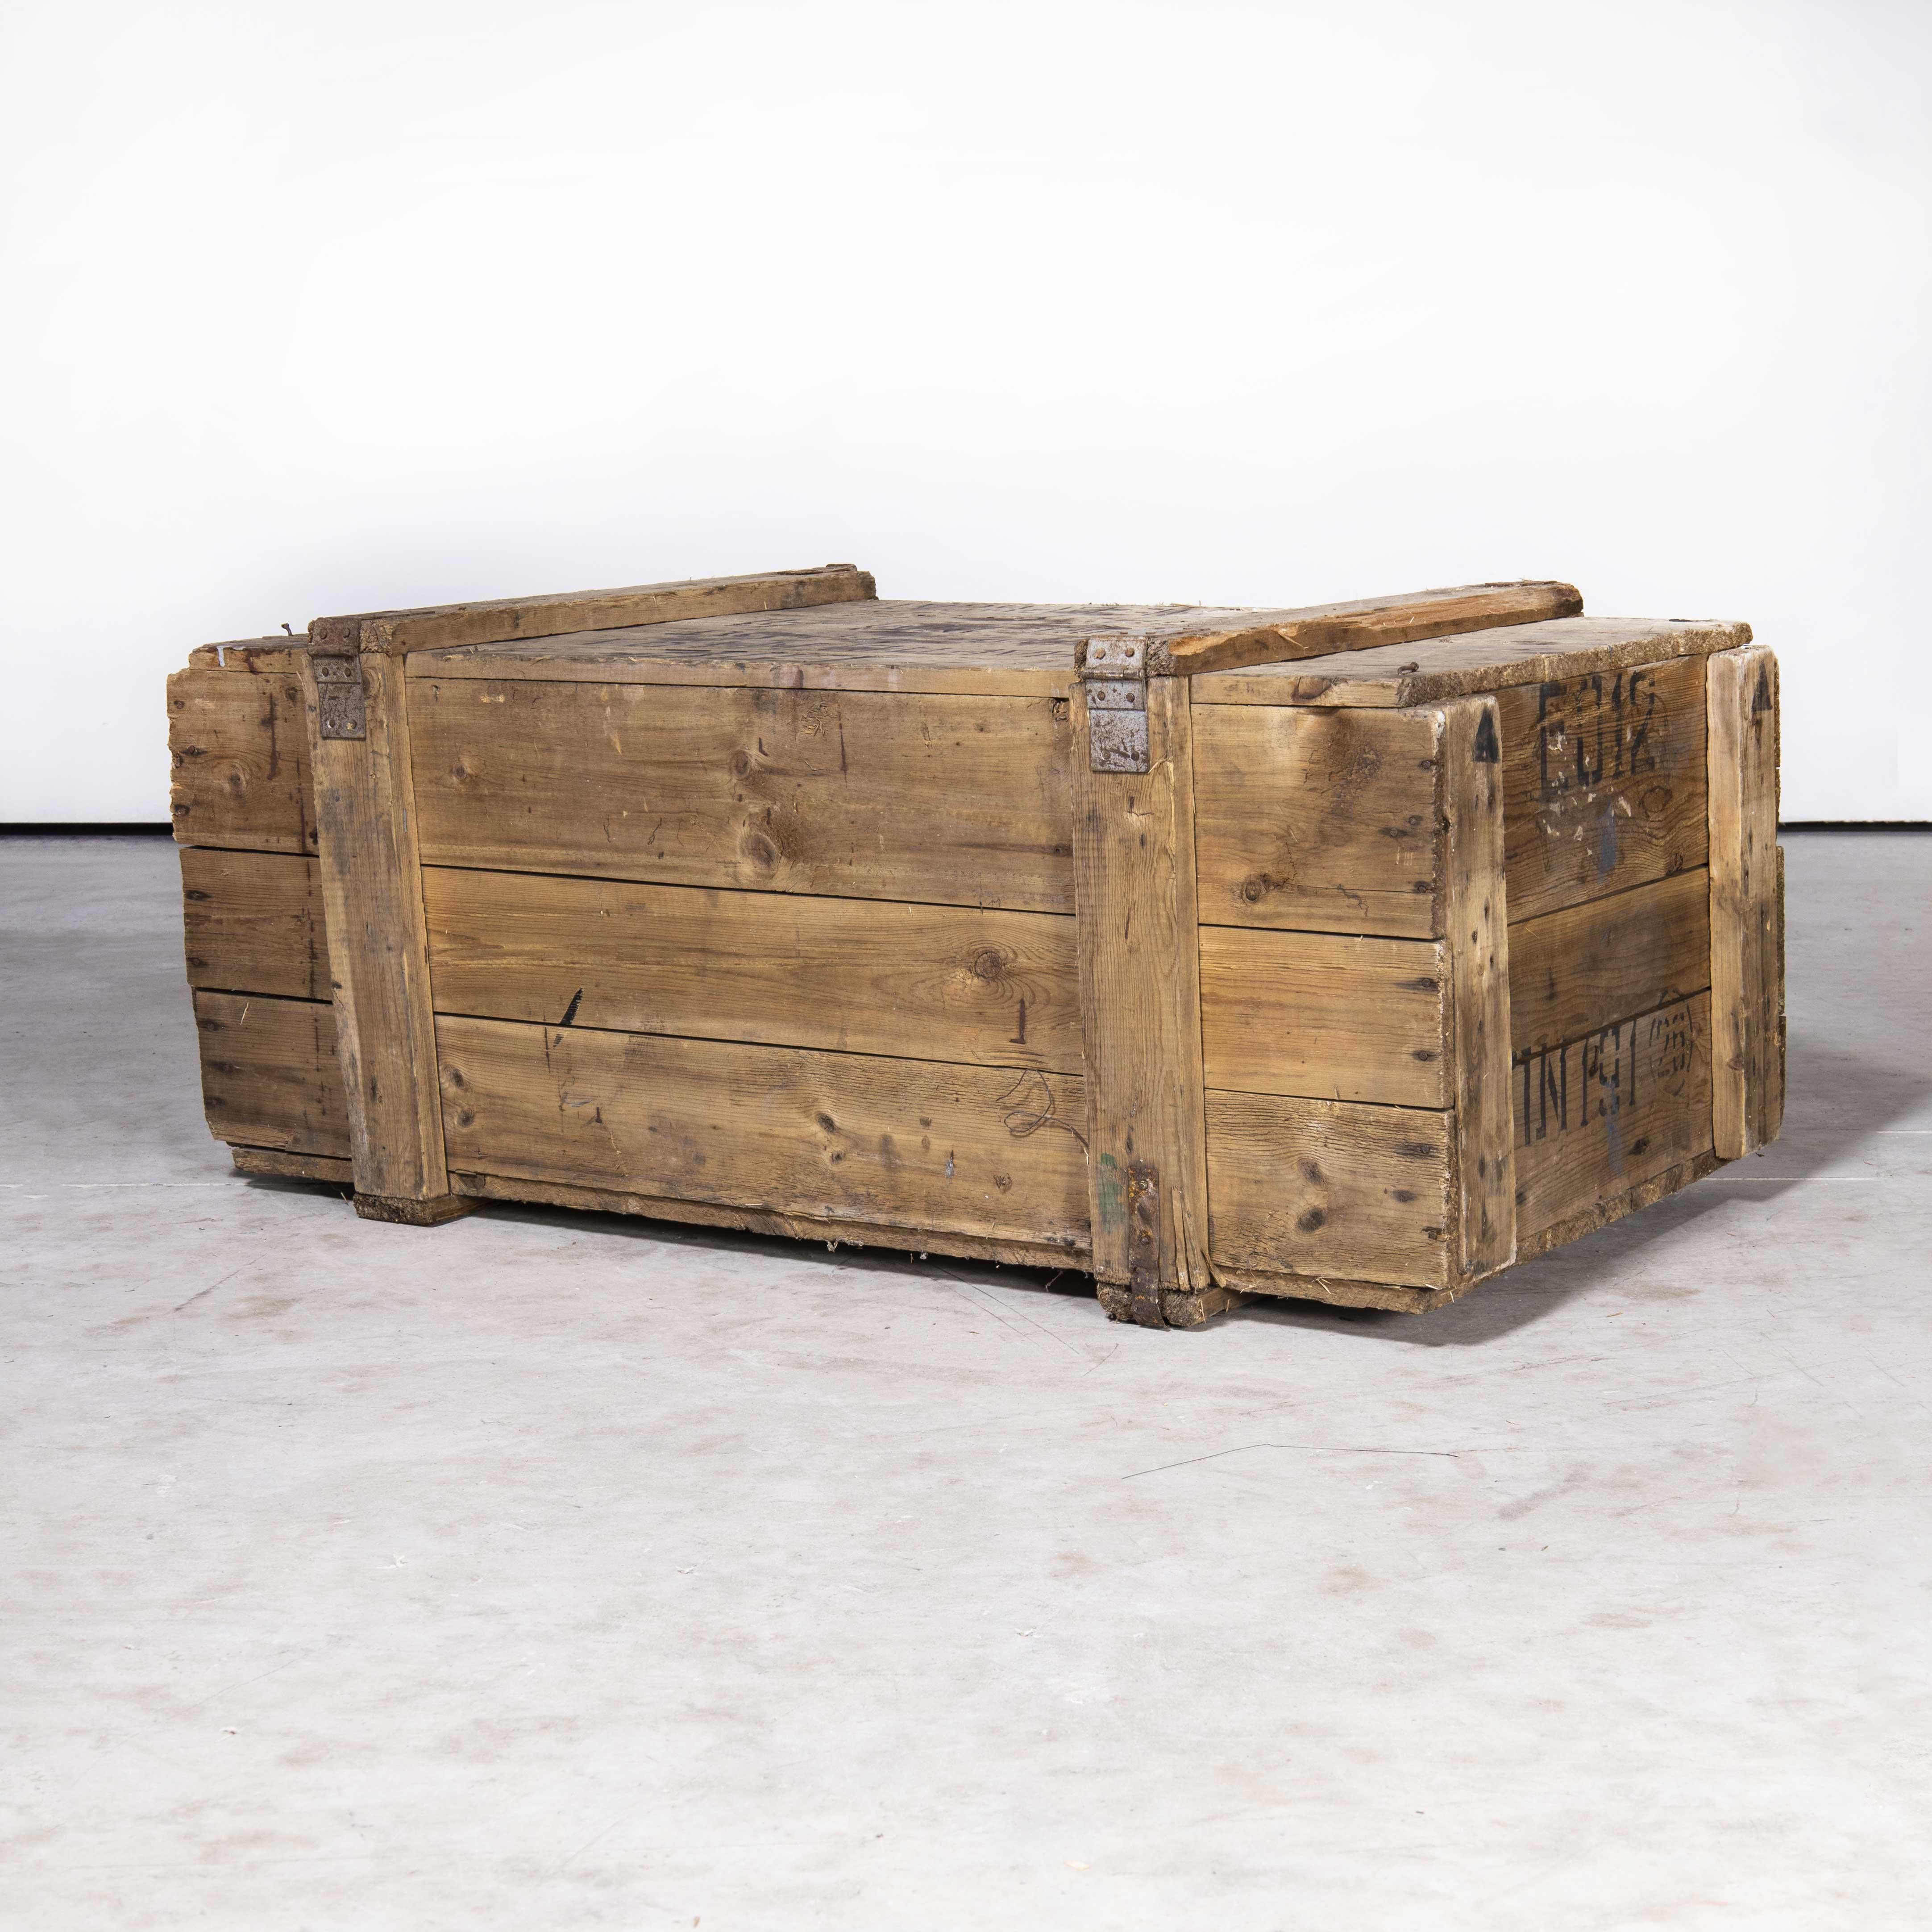 1950’s Russian Military storage crate (Model 255.2)
1950’s Russian Military storage crate (Model 255.2). Large heavy duty pine crate sourced from military dead stock. We get a lot of demand for this sort of large crate useful for general storage,